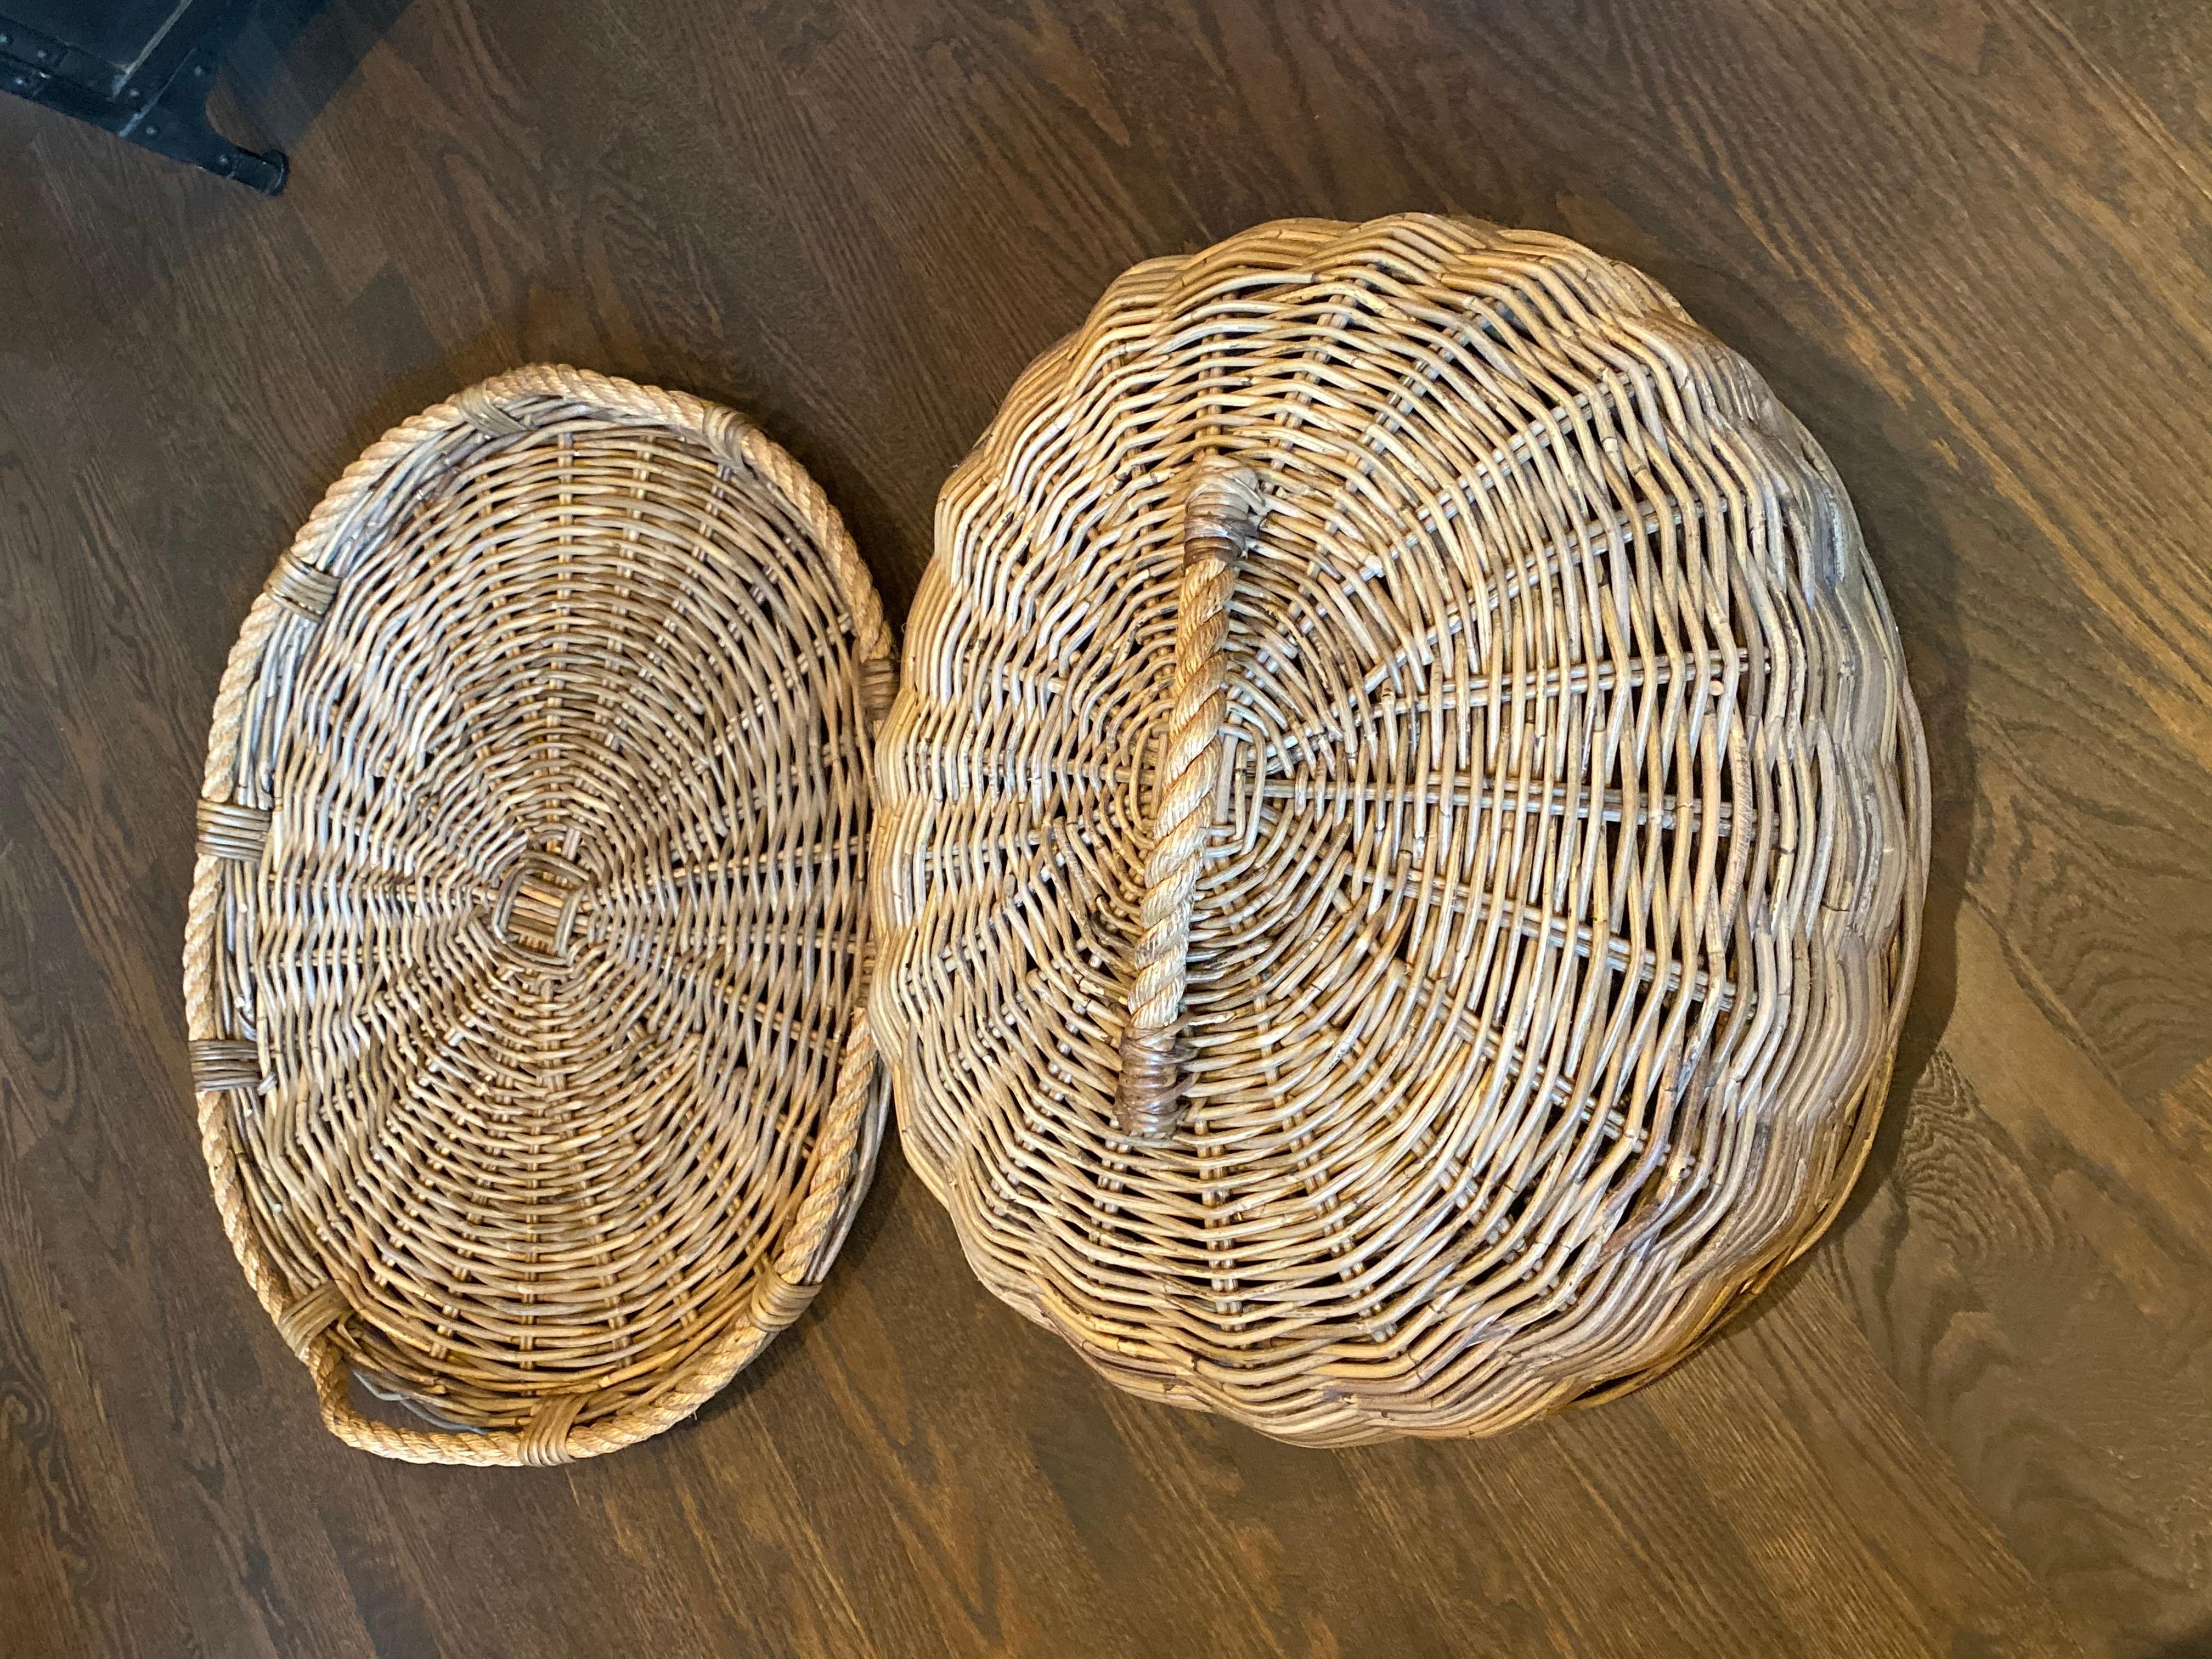 Rustic Oversized Restoration Hardware Rattan Tray and Cloche For Sale